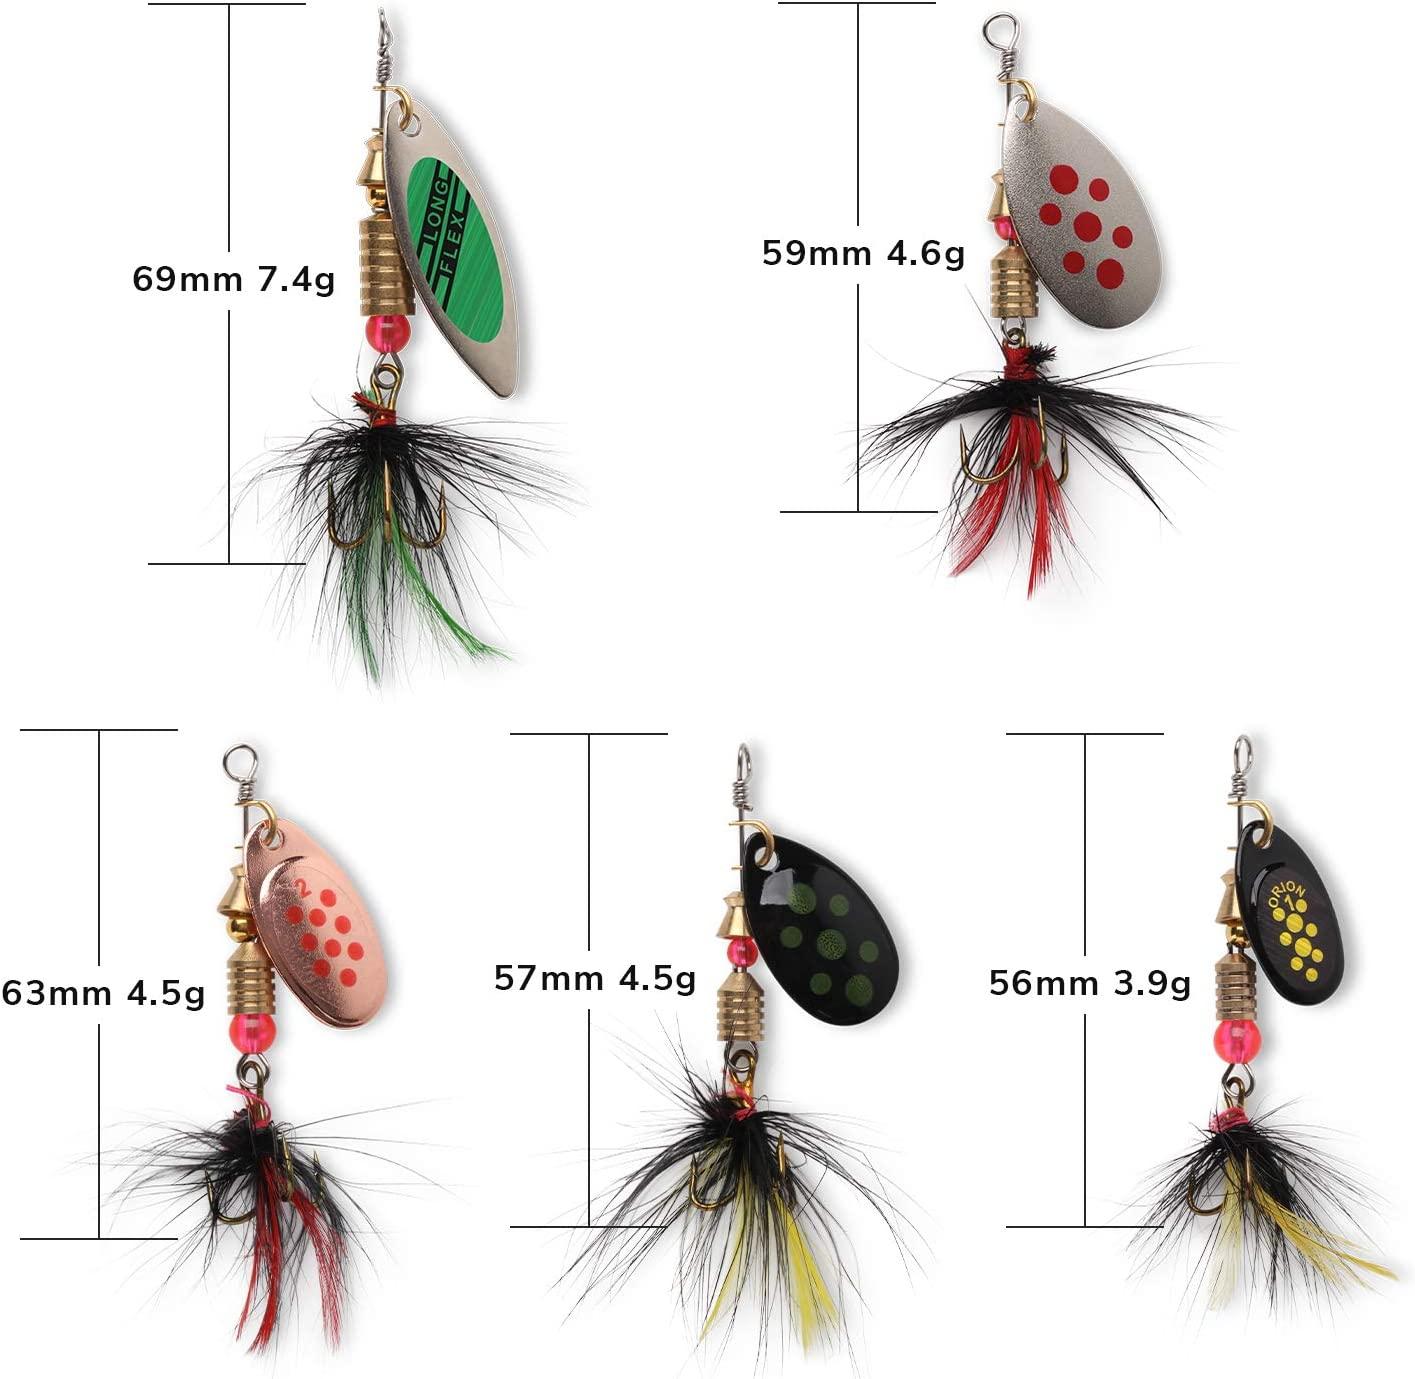  RONCHEN Bass Fishing Lures Spinner Baits, Hard Metal